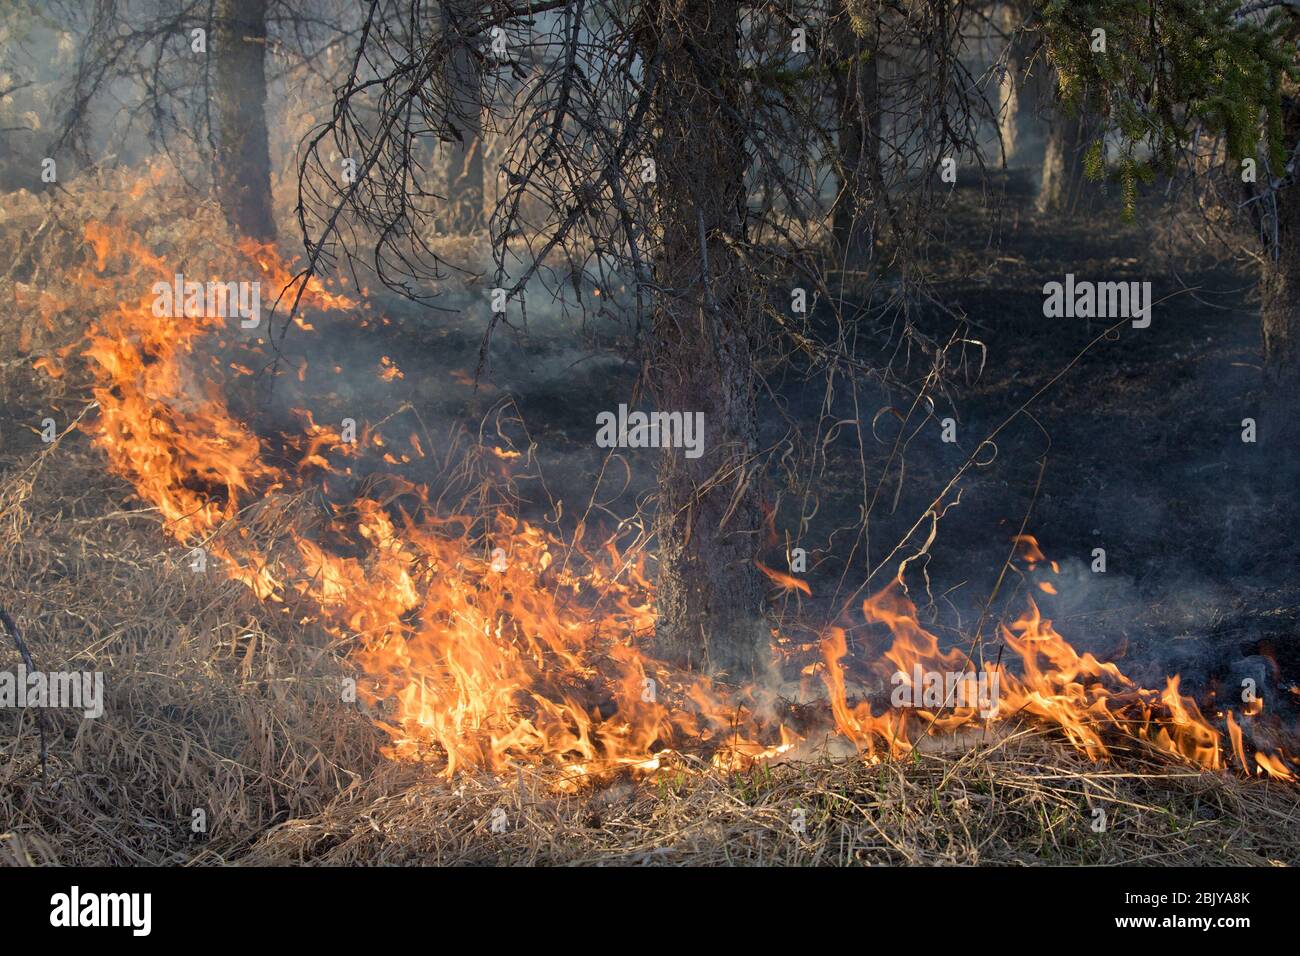 Ground fire burning understory along edge of spruce forest in a nature reserve Stock Photo